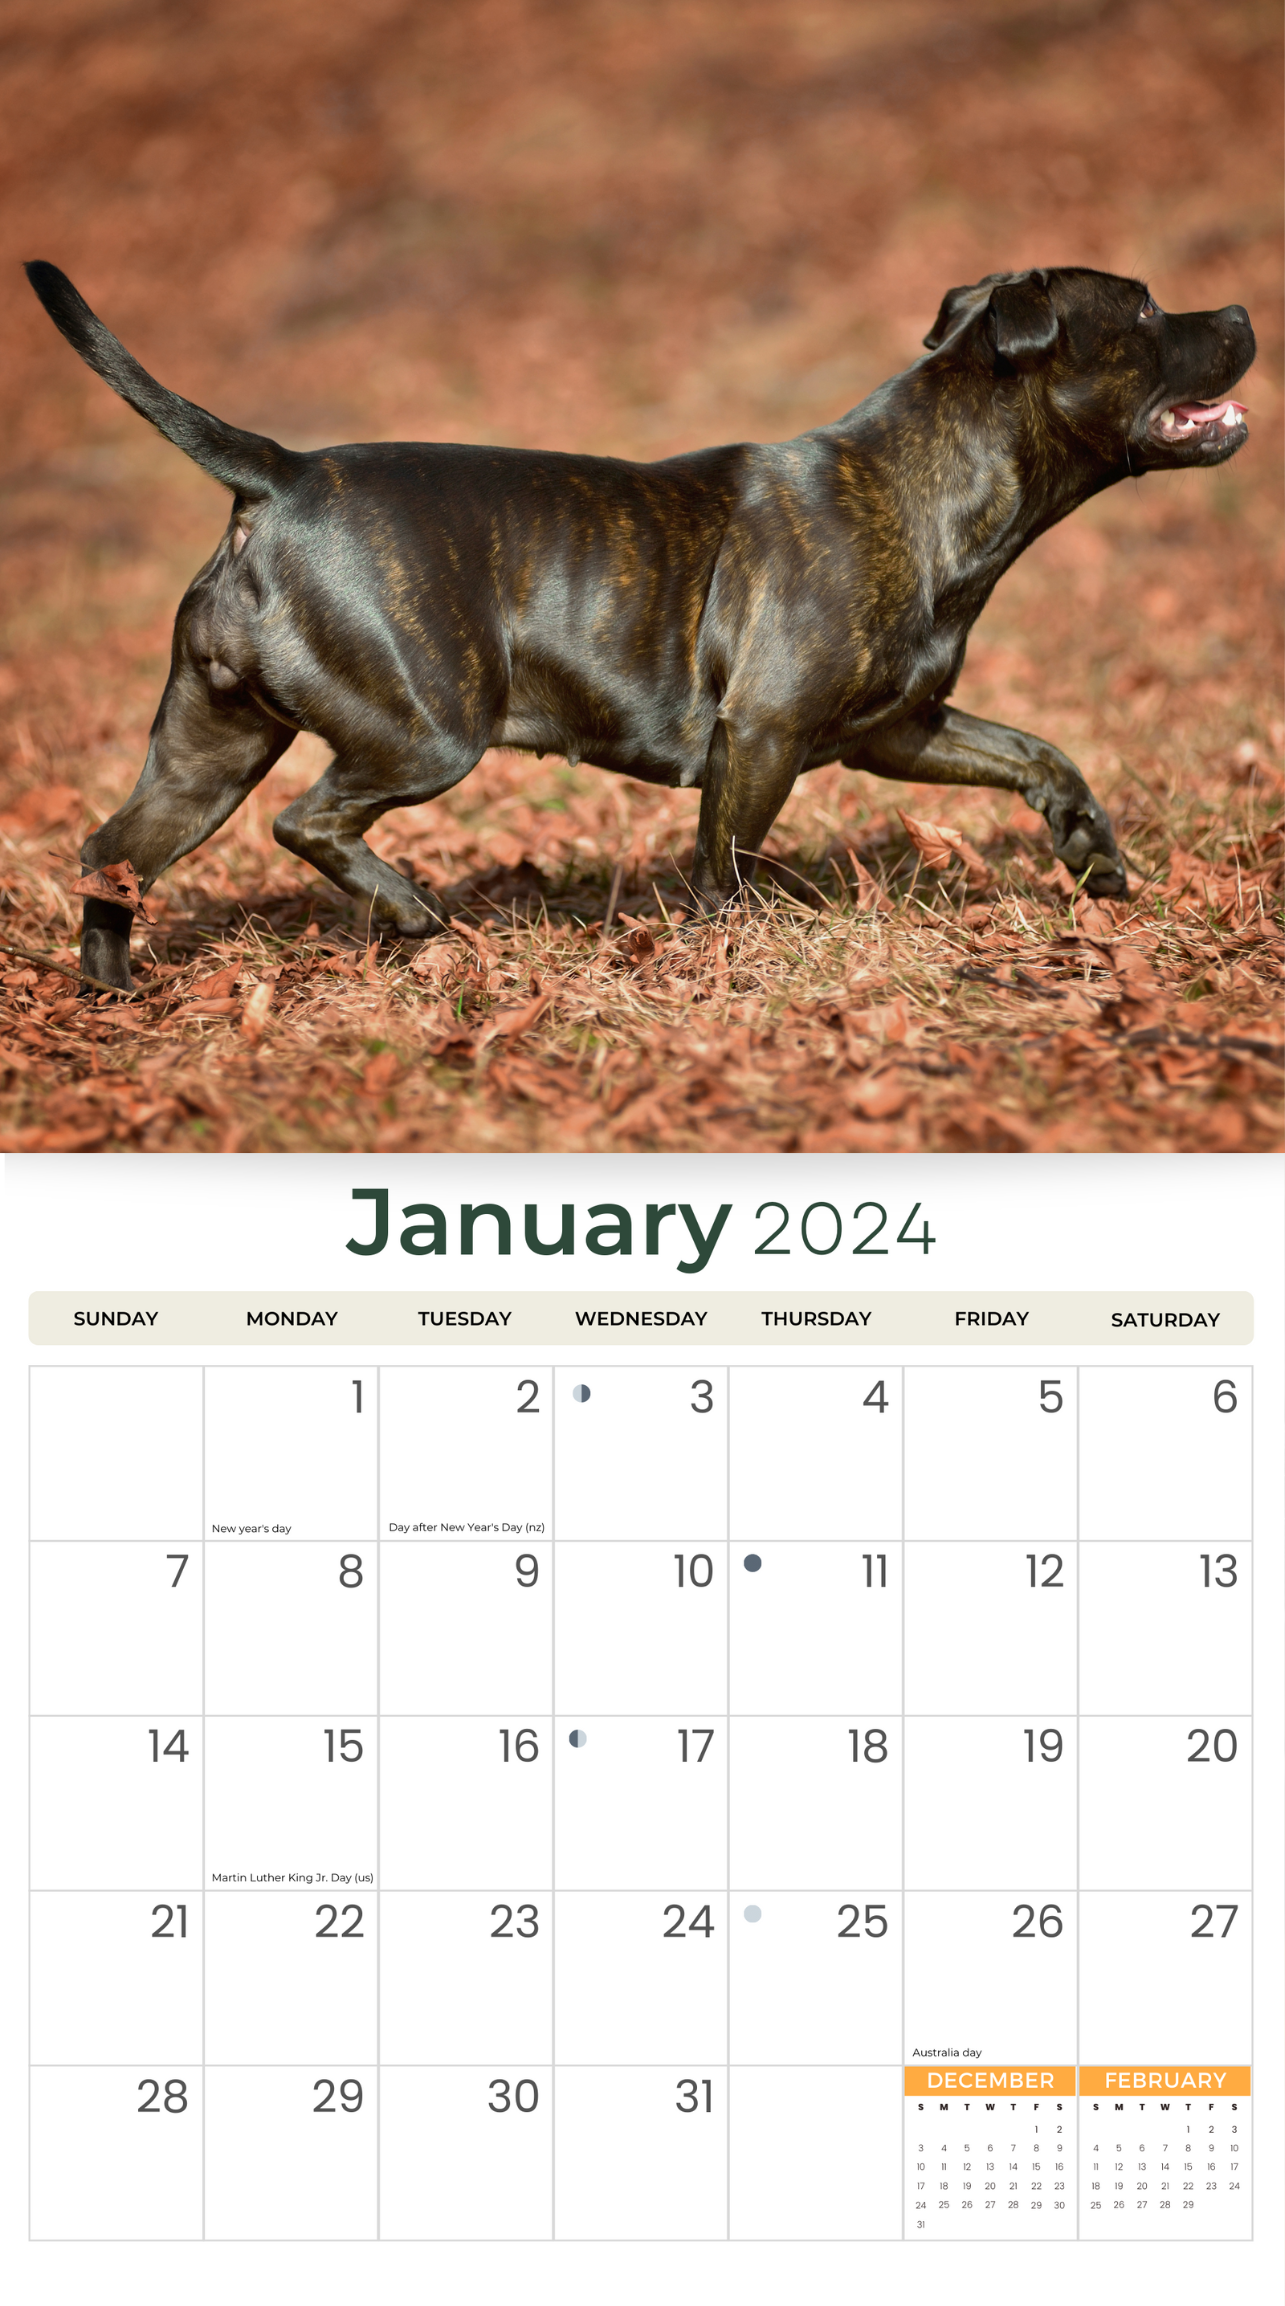 2024 Staffordshire Bull Terriers Dogs & Puppies - Deluxe Wall Calendar by Just Calendars - 16 Month - Plastic Free